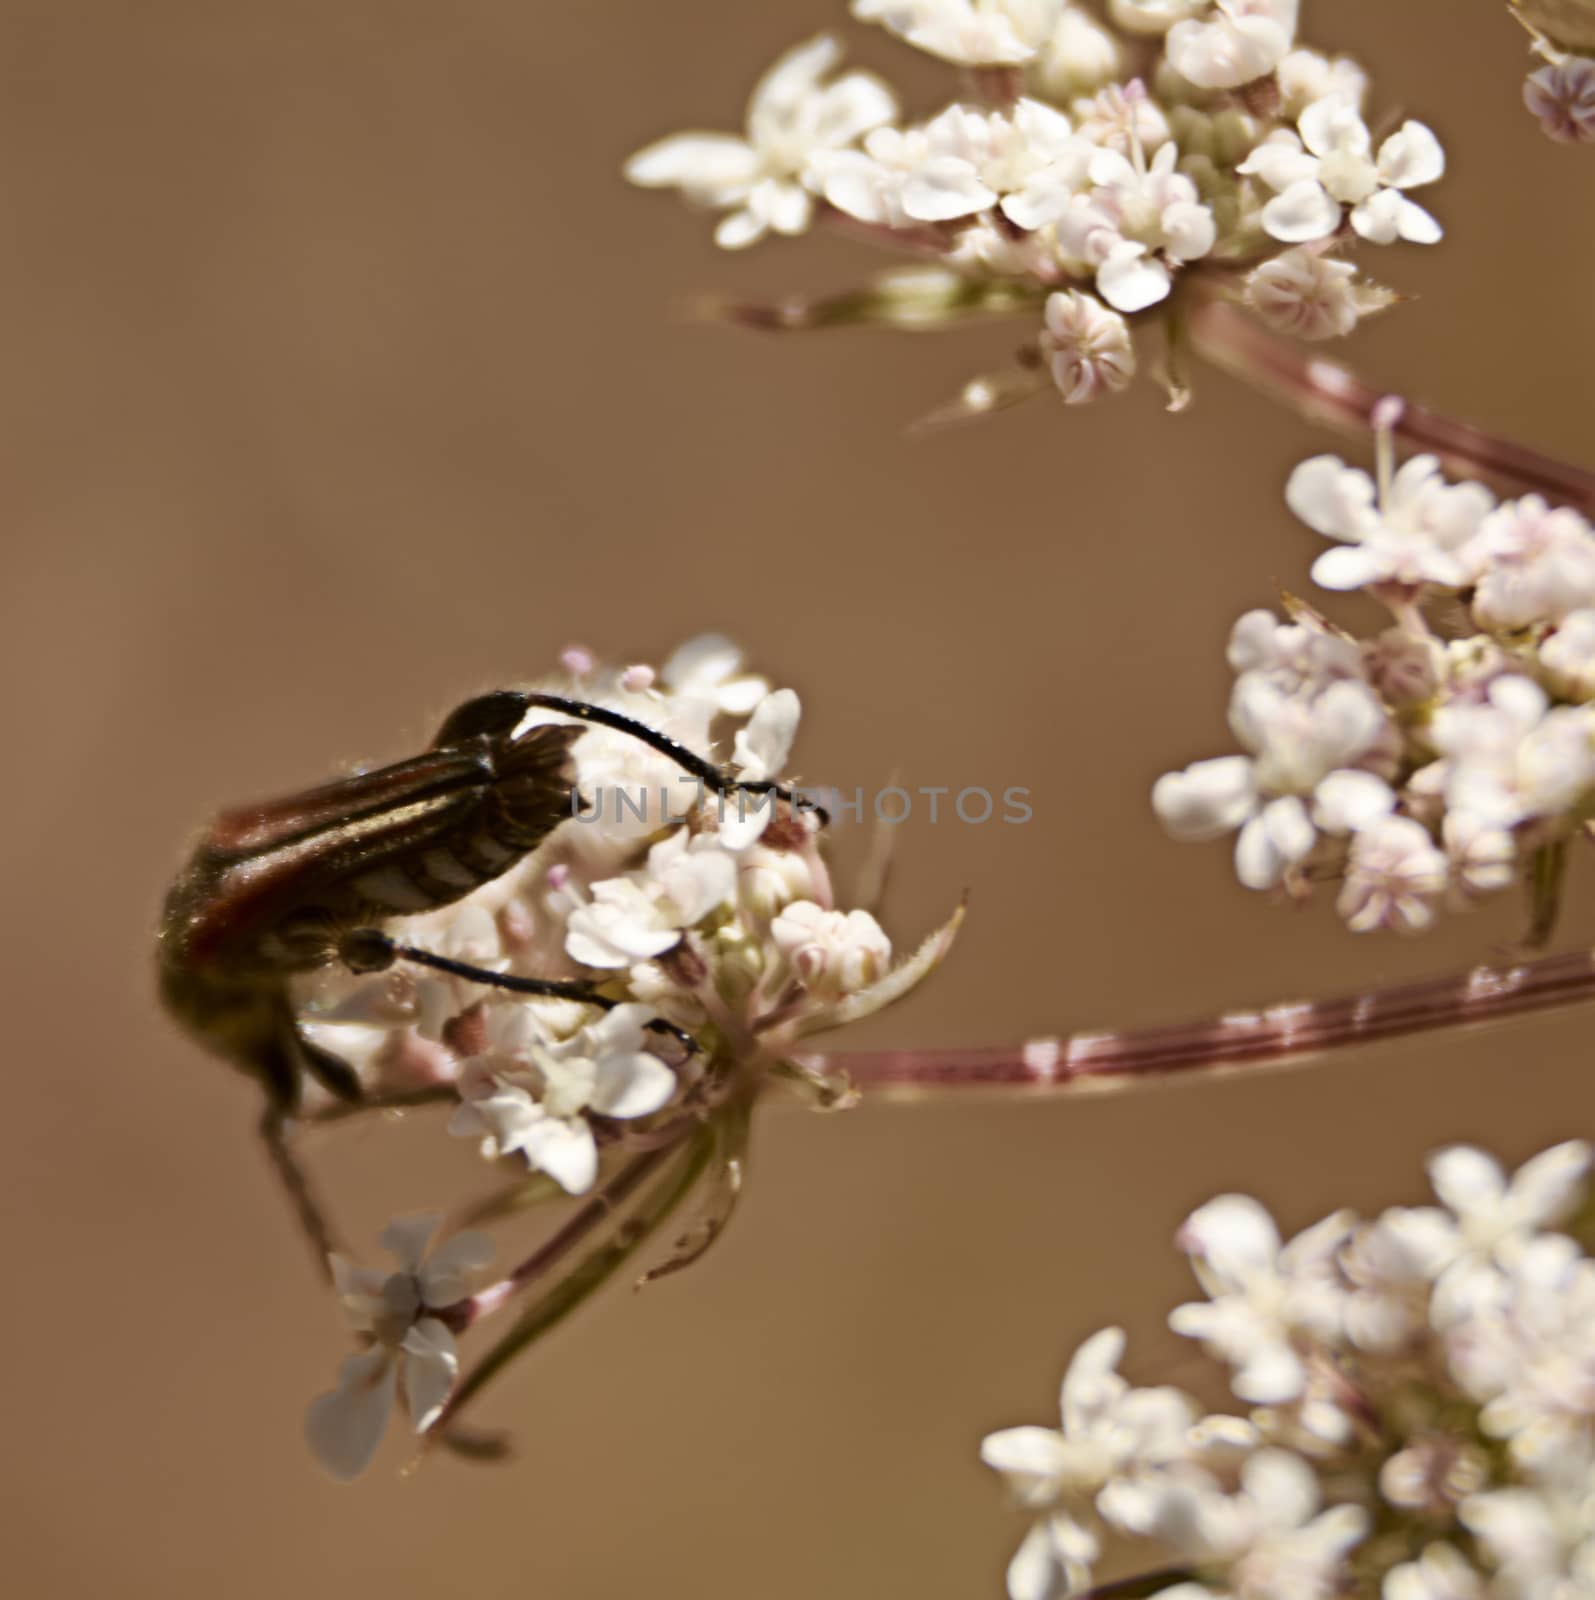 Insect eating pollen on white flowers, macro photography, details, black,